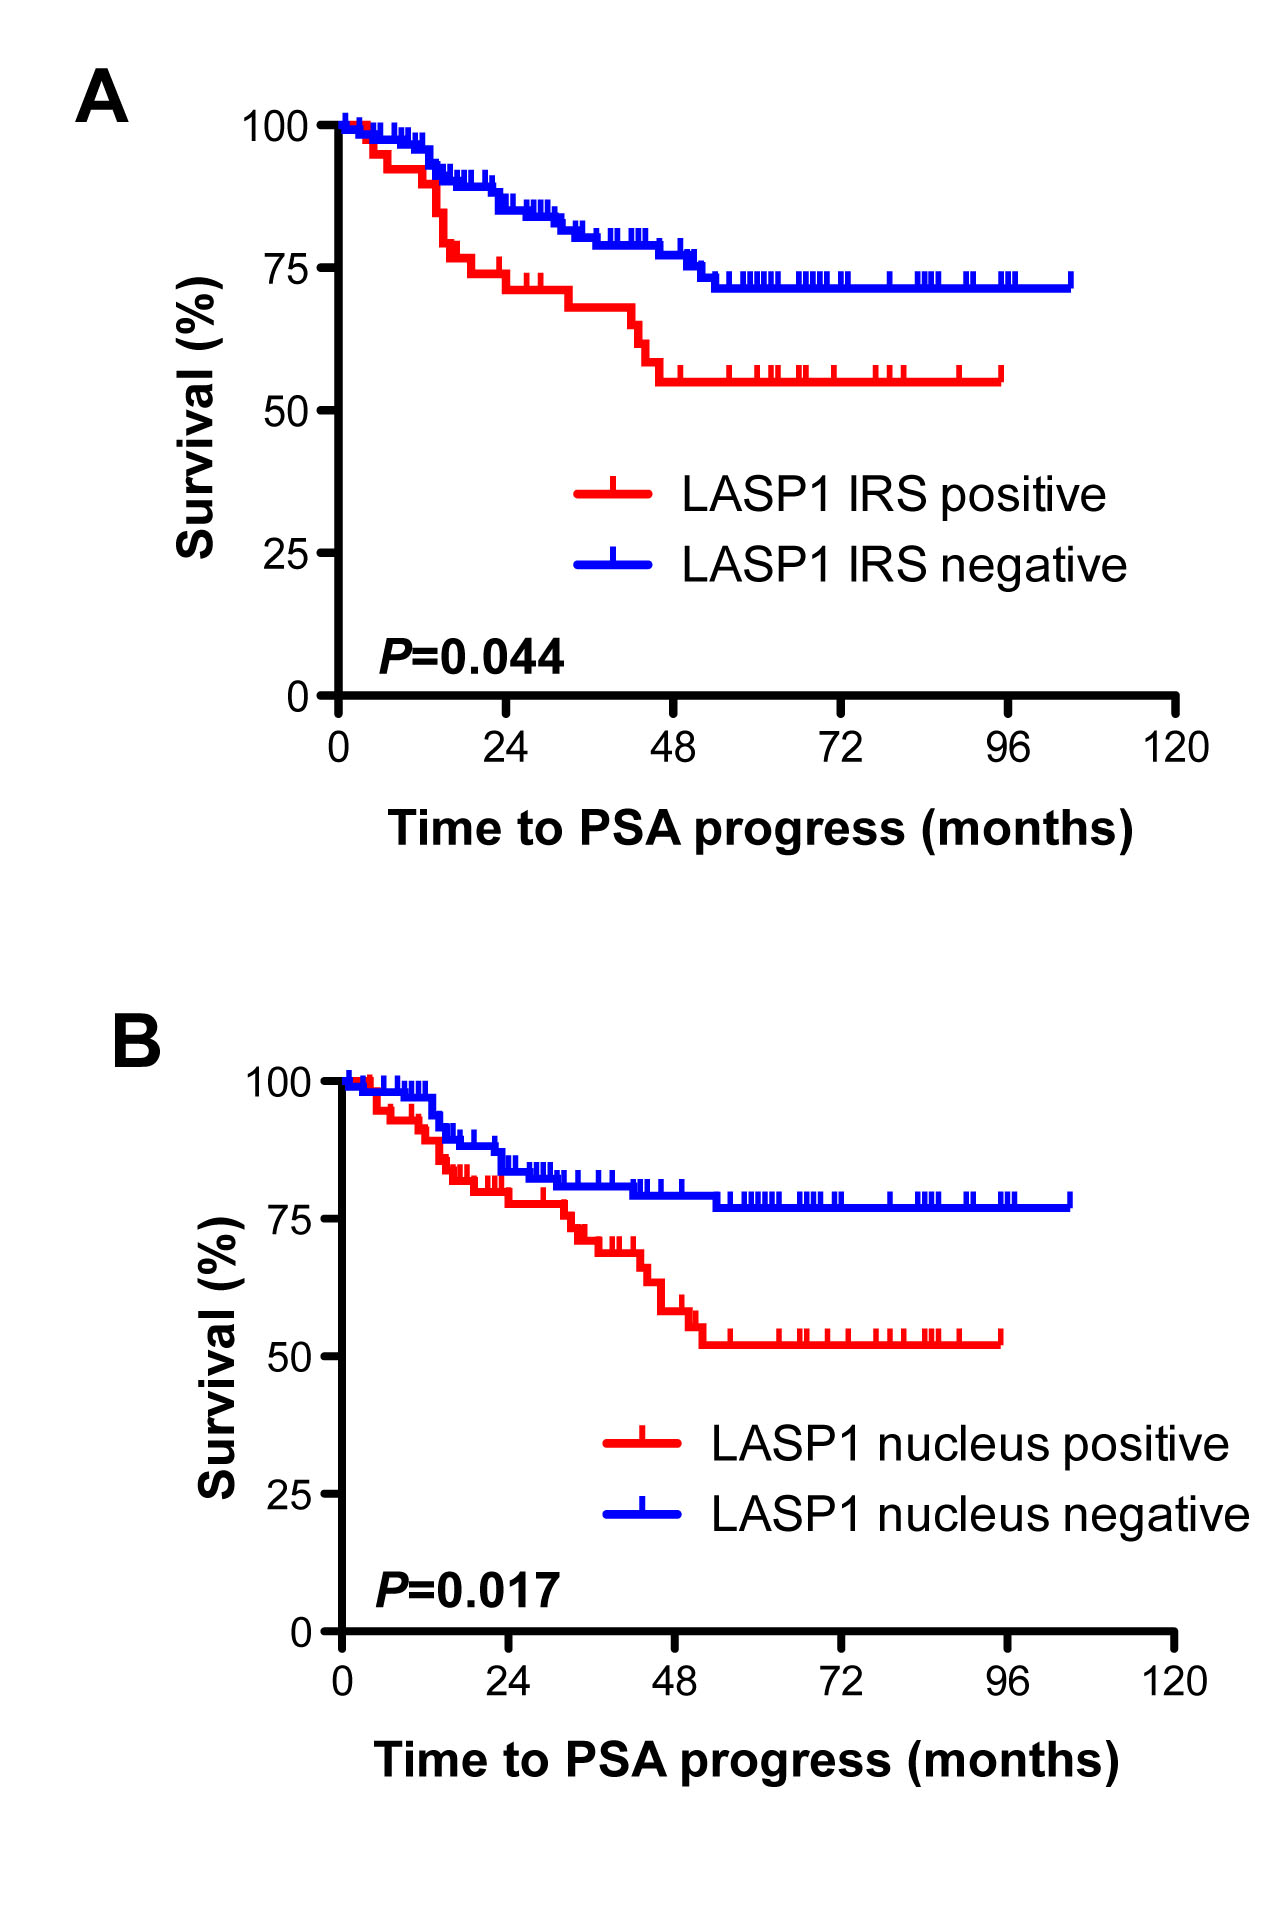 Cytosolic and nuclear LASP1 positivity correlate with PSA progress A: Kaplan-Meier plot displaying patients&#x2019; probability for PSA progress stratified by cytosolic LASP1 positivity (IRS&gt;5) and negativity (IRS&lt;5) B: Kaplan-Meier plot displaying patients&#x2019; probability for PSA progress stratified by nuclear LASP1 positivity (NUC≥10%) and negativity (NUC&lt;10%).